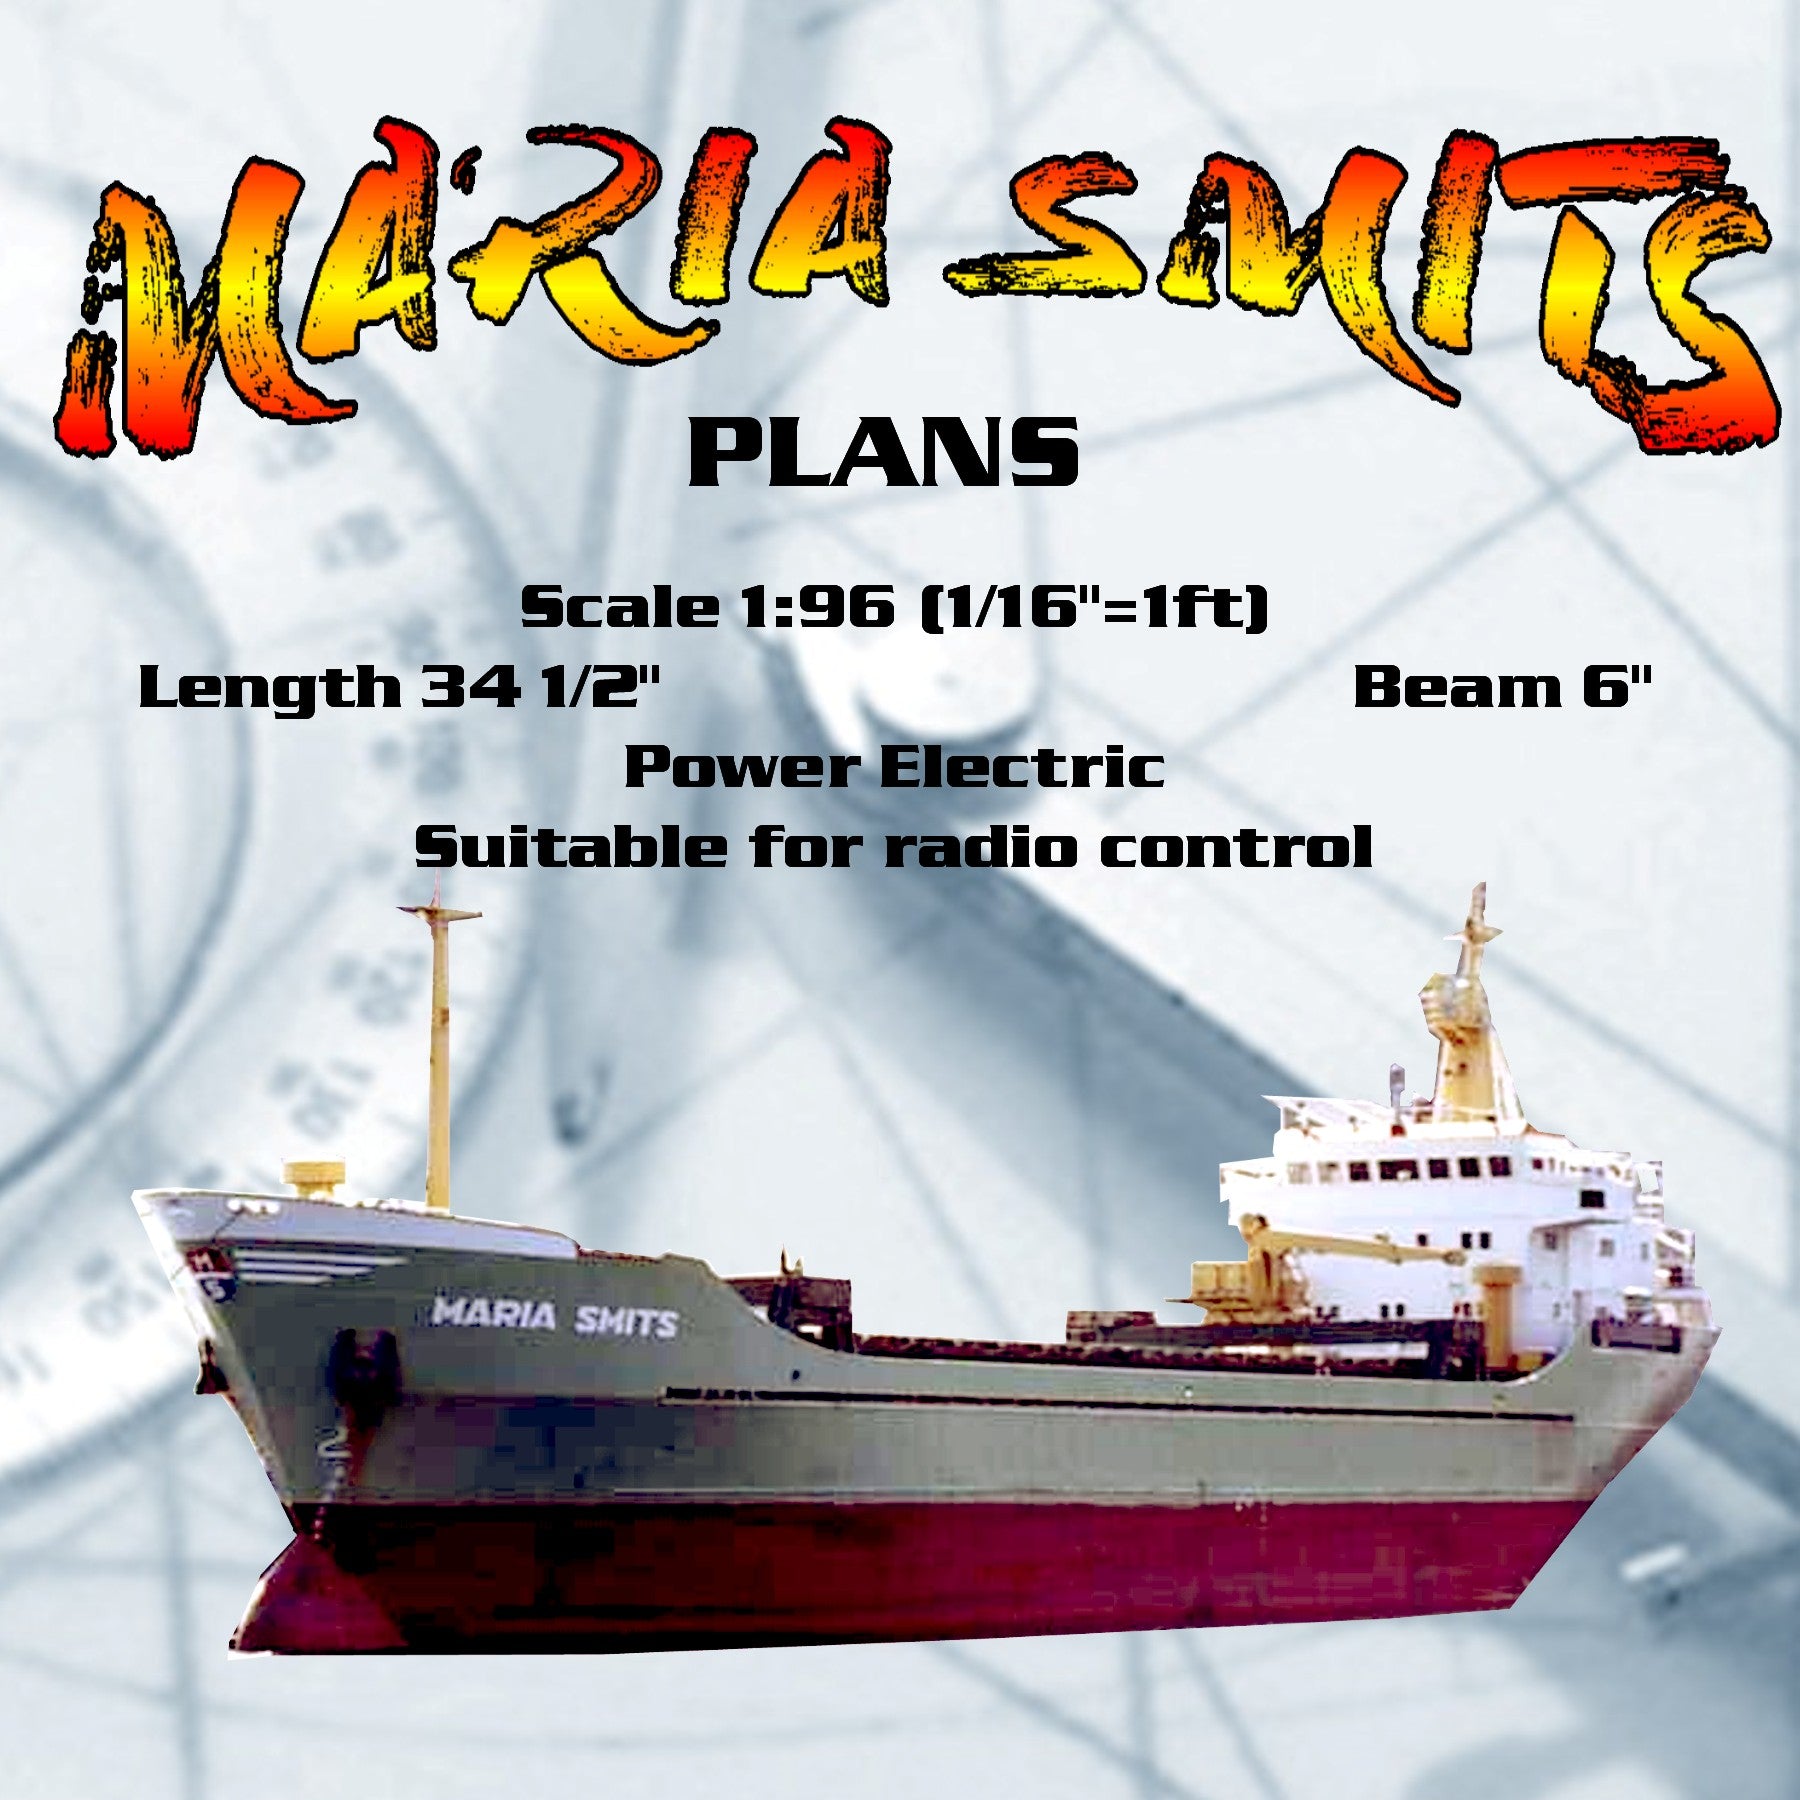 full size printed plans modern dutch coaster scale 1:96 maria smits suitable for radio control